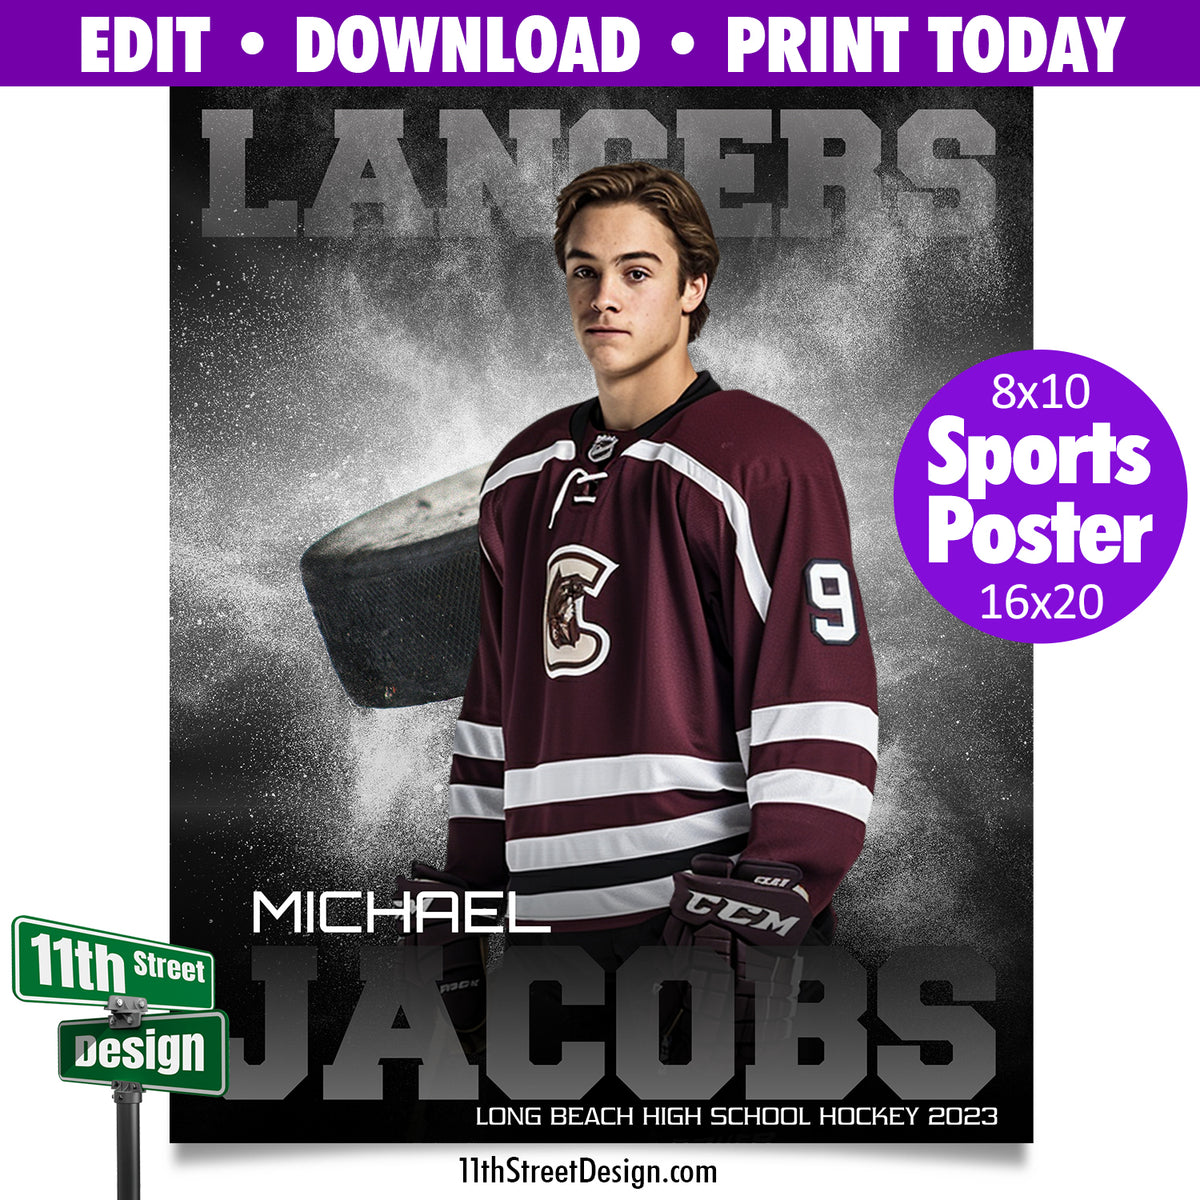 Sports Poster Powder Explosion Hockey Template • Edit Now Online • Print Today • Digital Download • Custom Sports Photos • Senior Day Night Poster